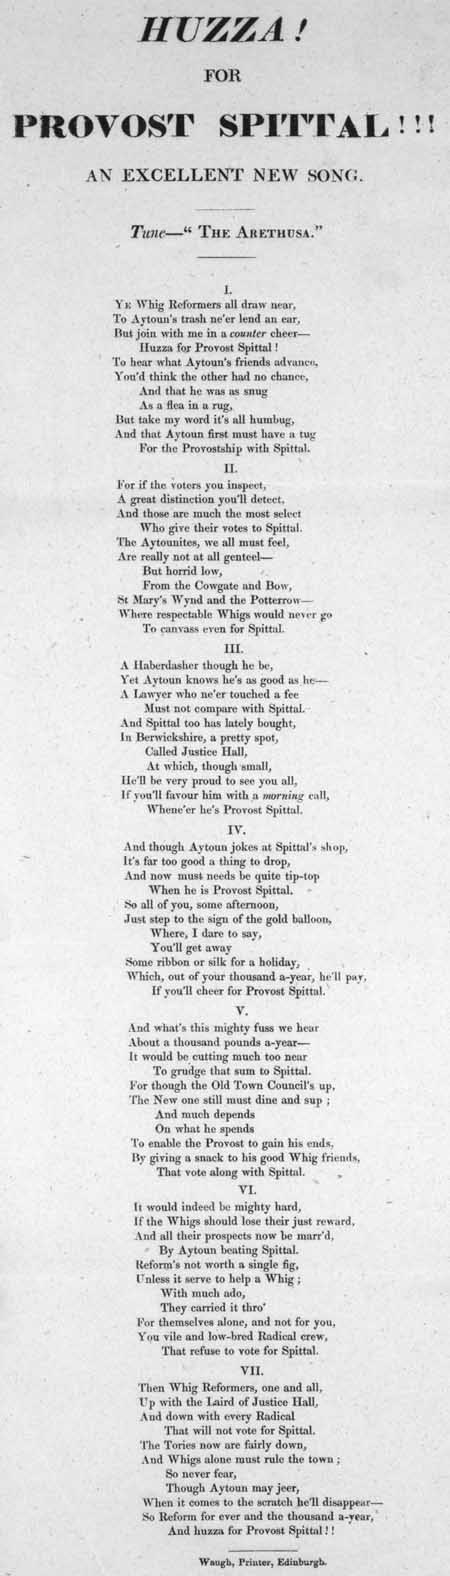 Broadside ballad entitled 'Huzzah! For Provost Spittal !!! An Excellent New Song'